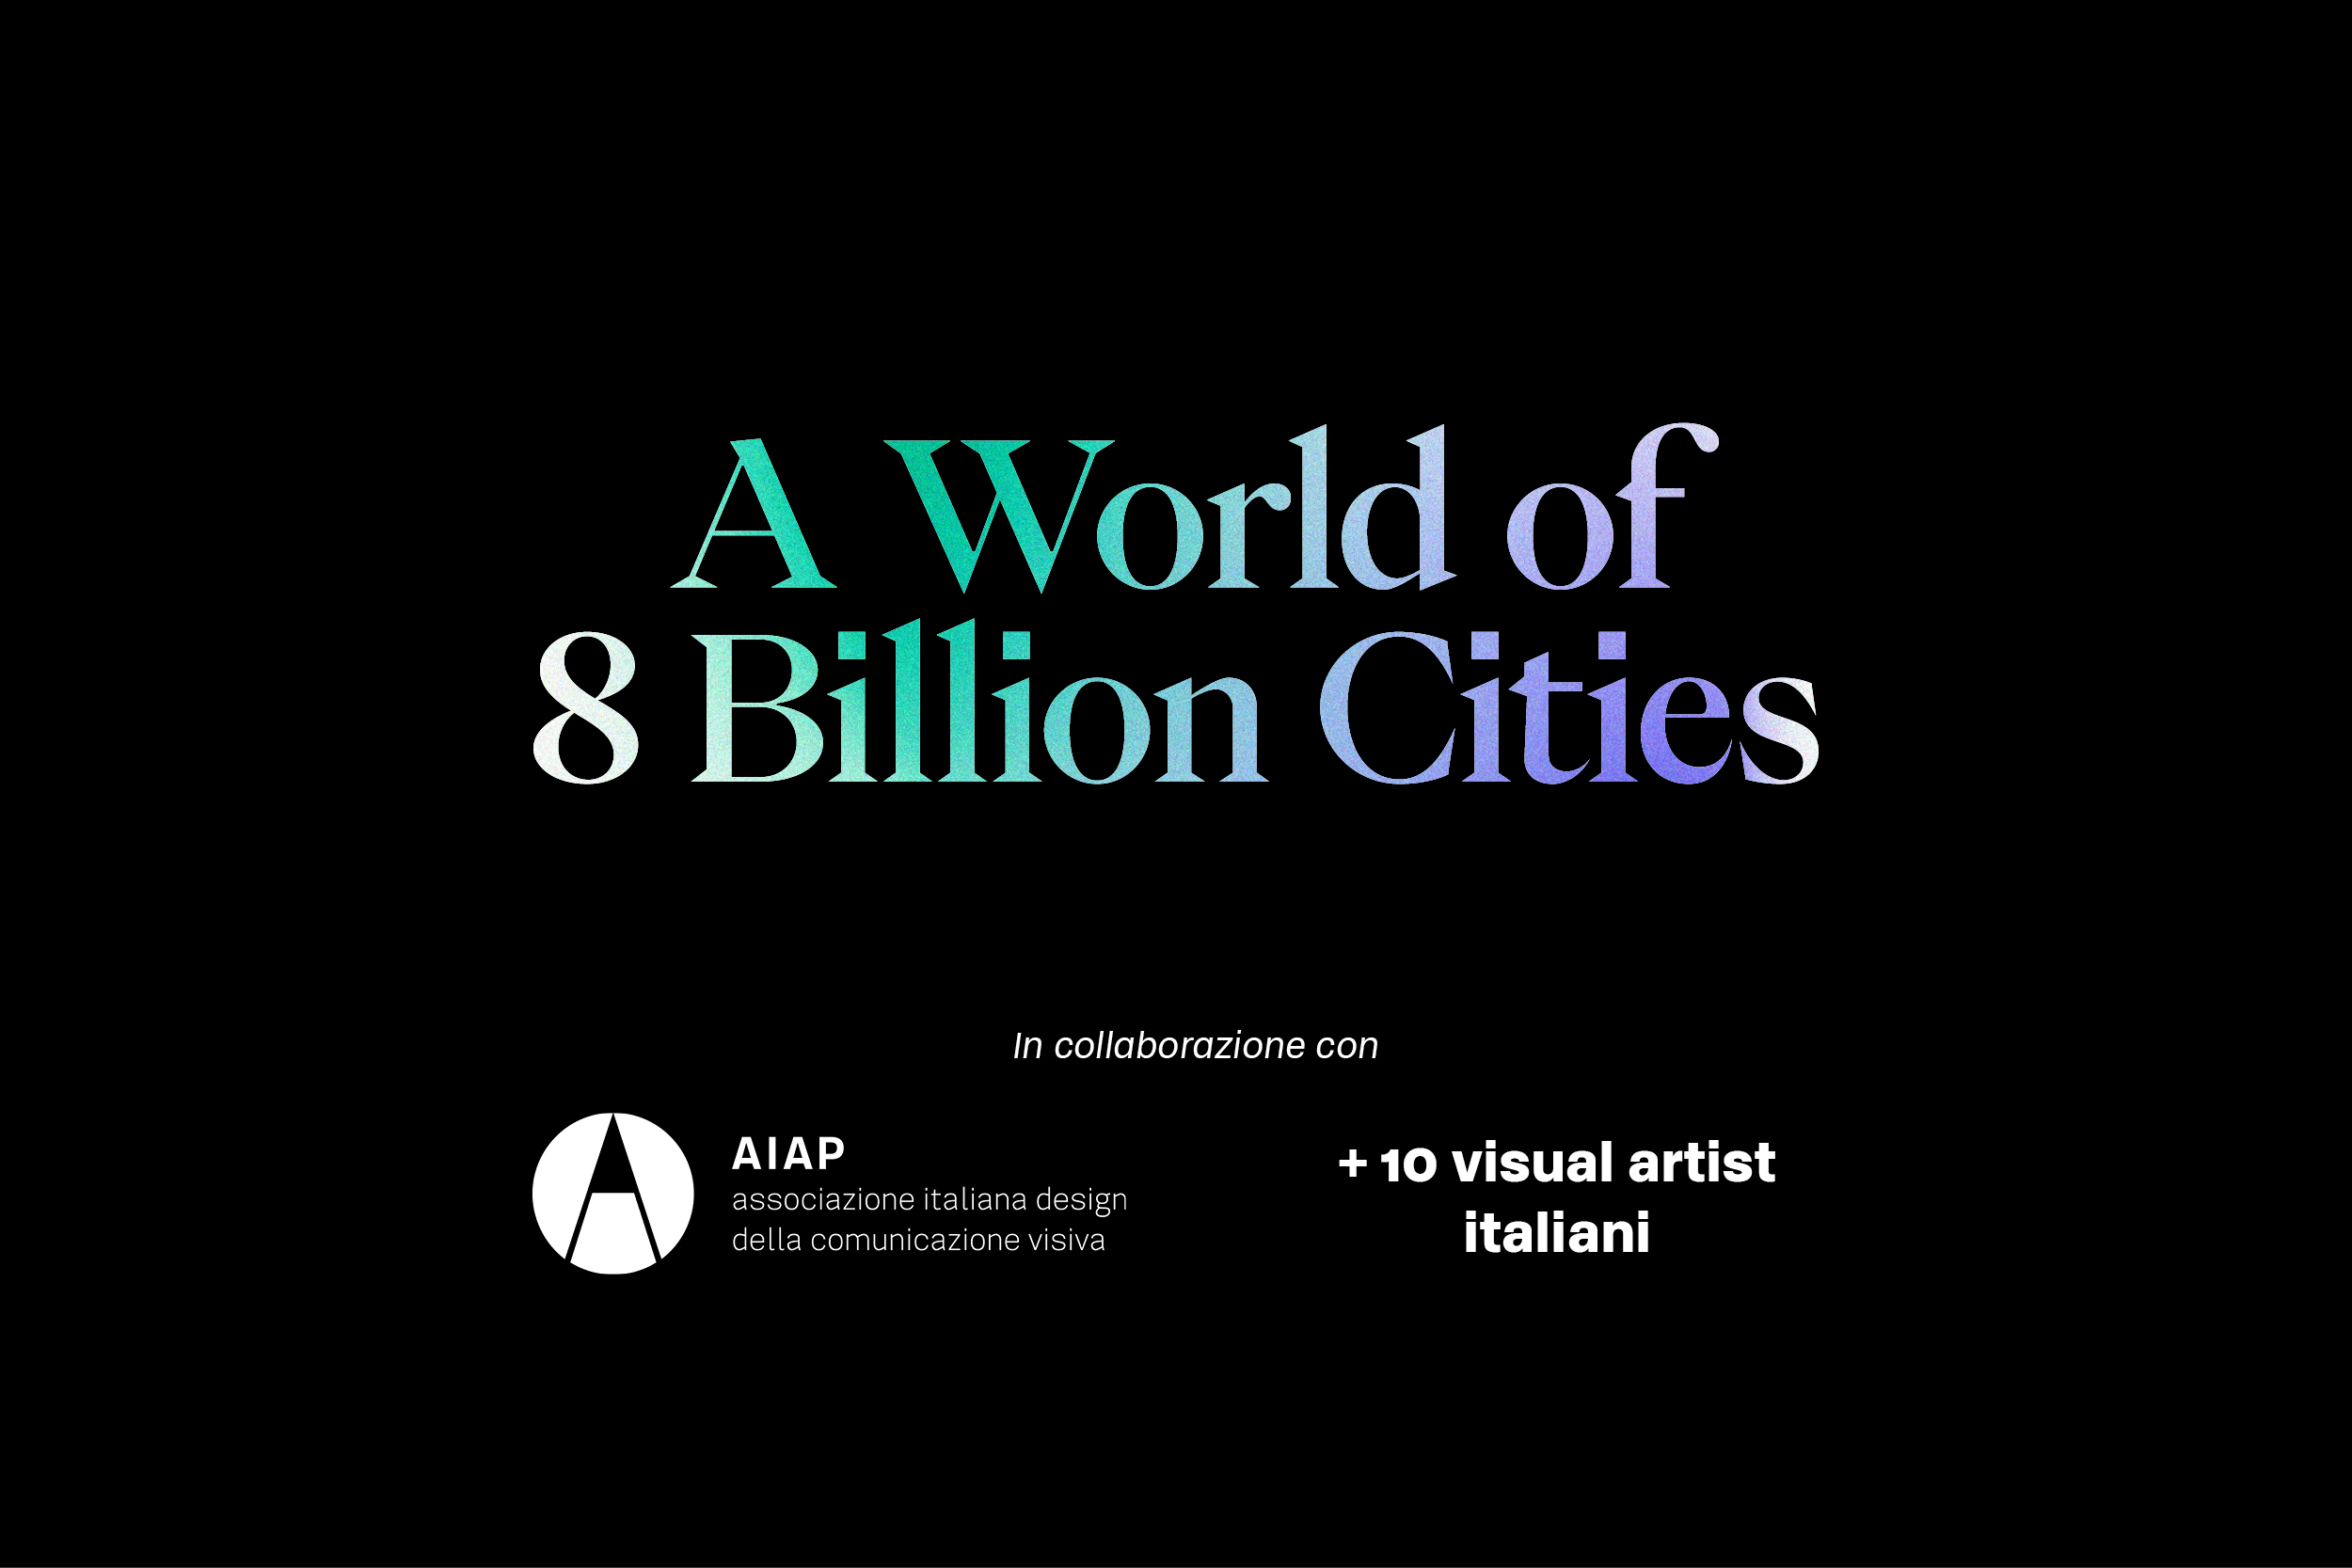 A World of 8 Billion Cities — The exhibition